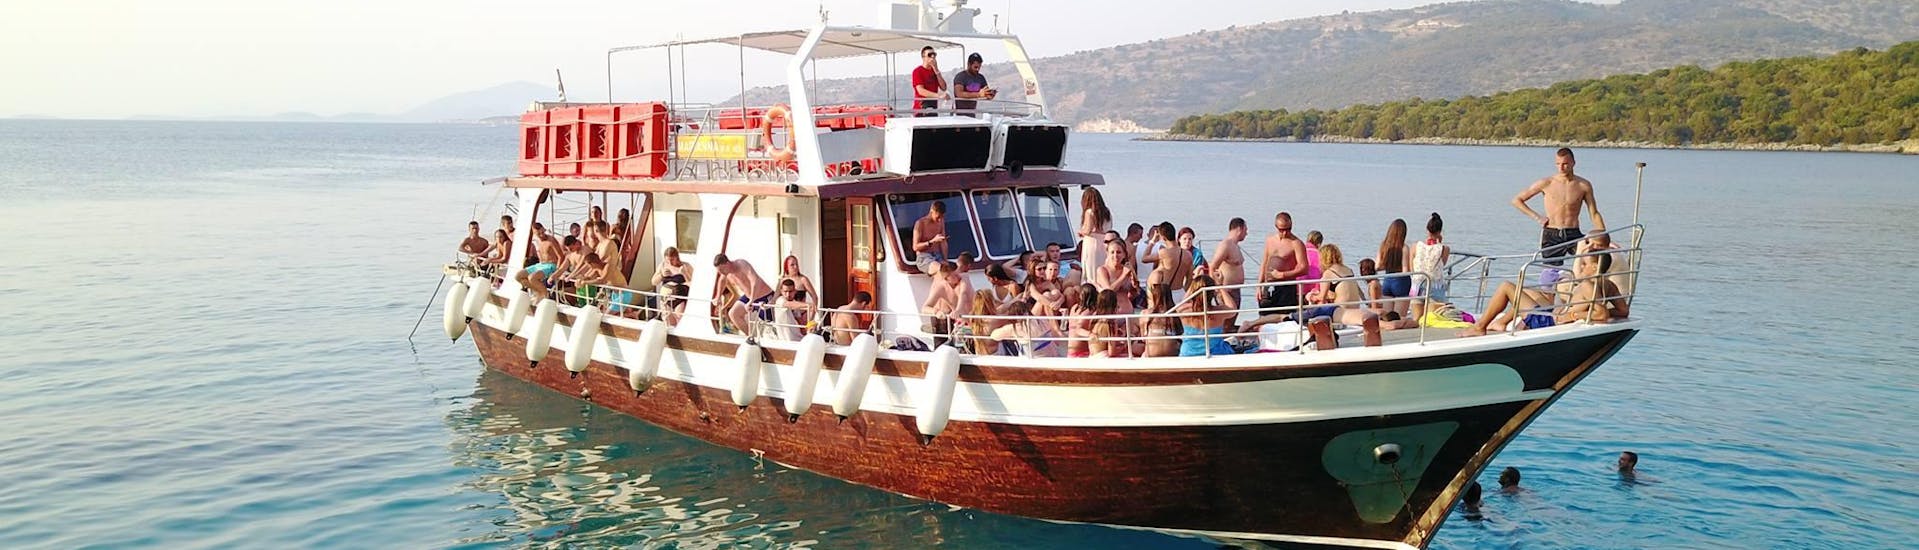 Pictures of the boat of Kavos Cruises used for boat trips. 